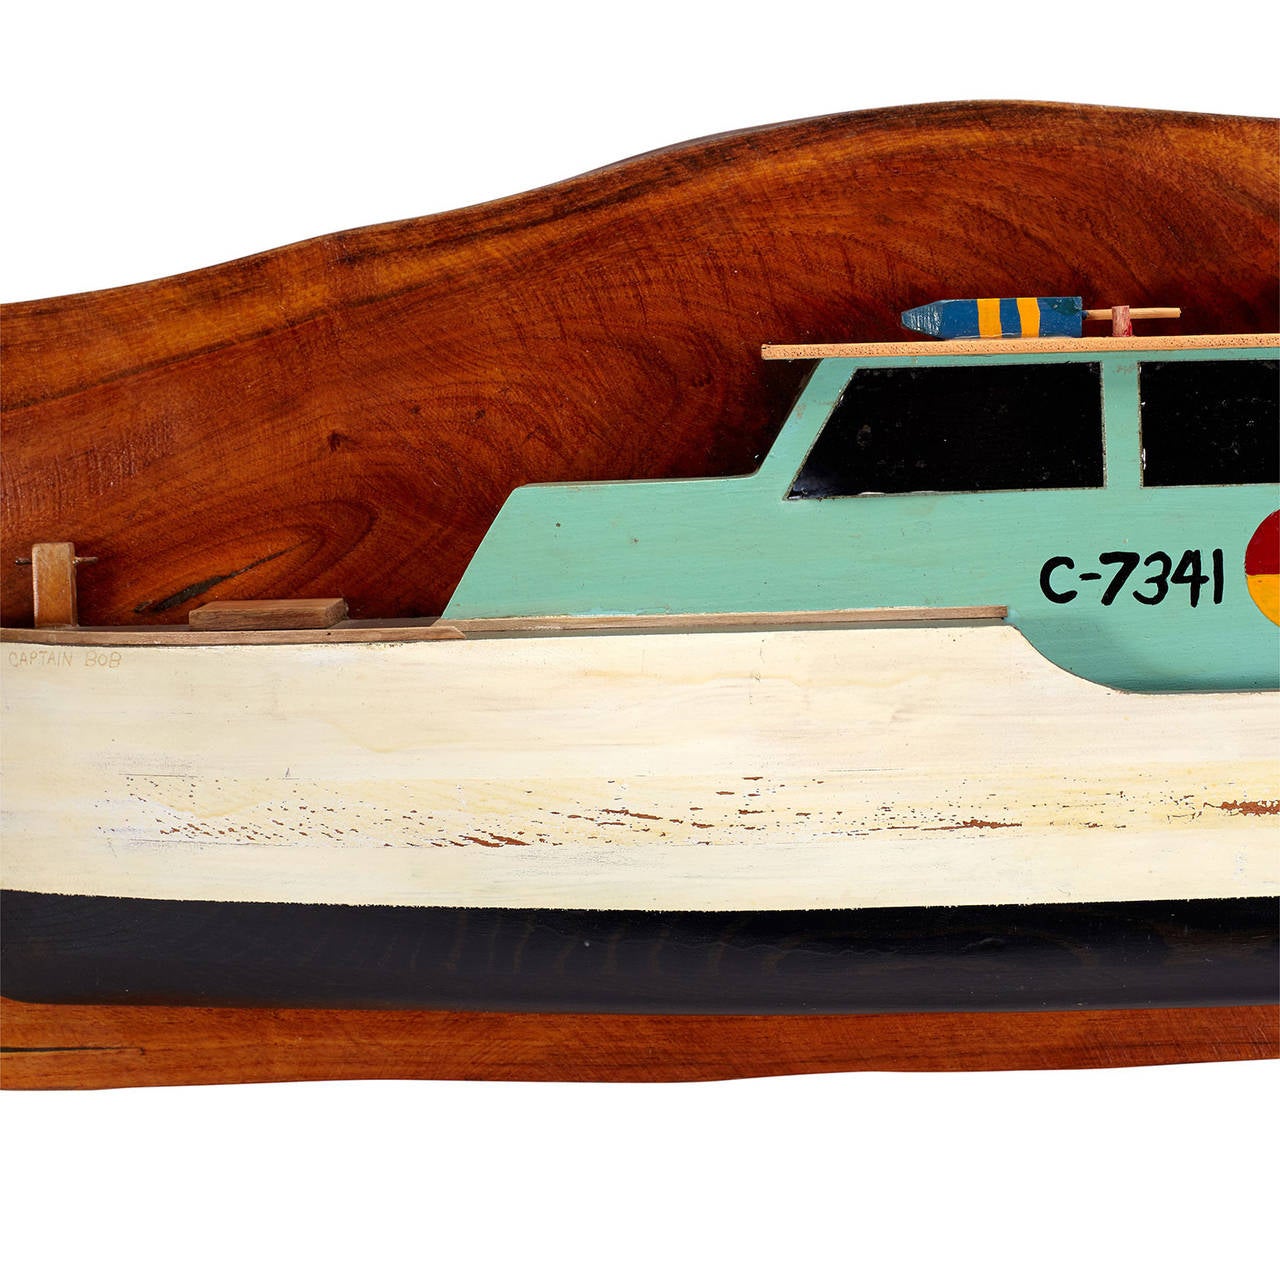 A unique vintage half-hull model ready to hang with beautiful cargo and buoy detail. “C-7341”.